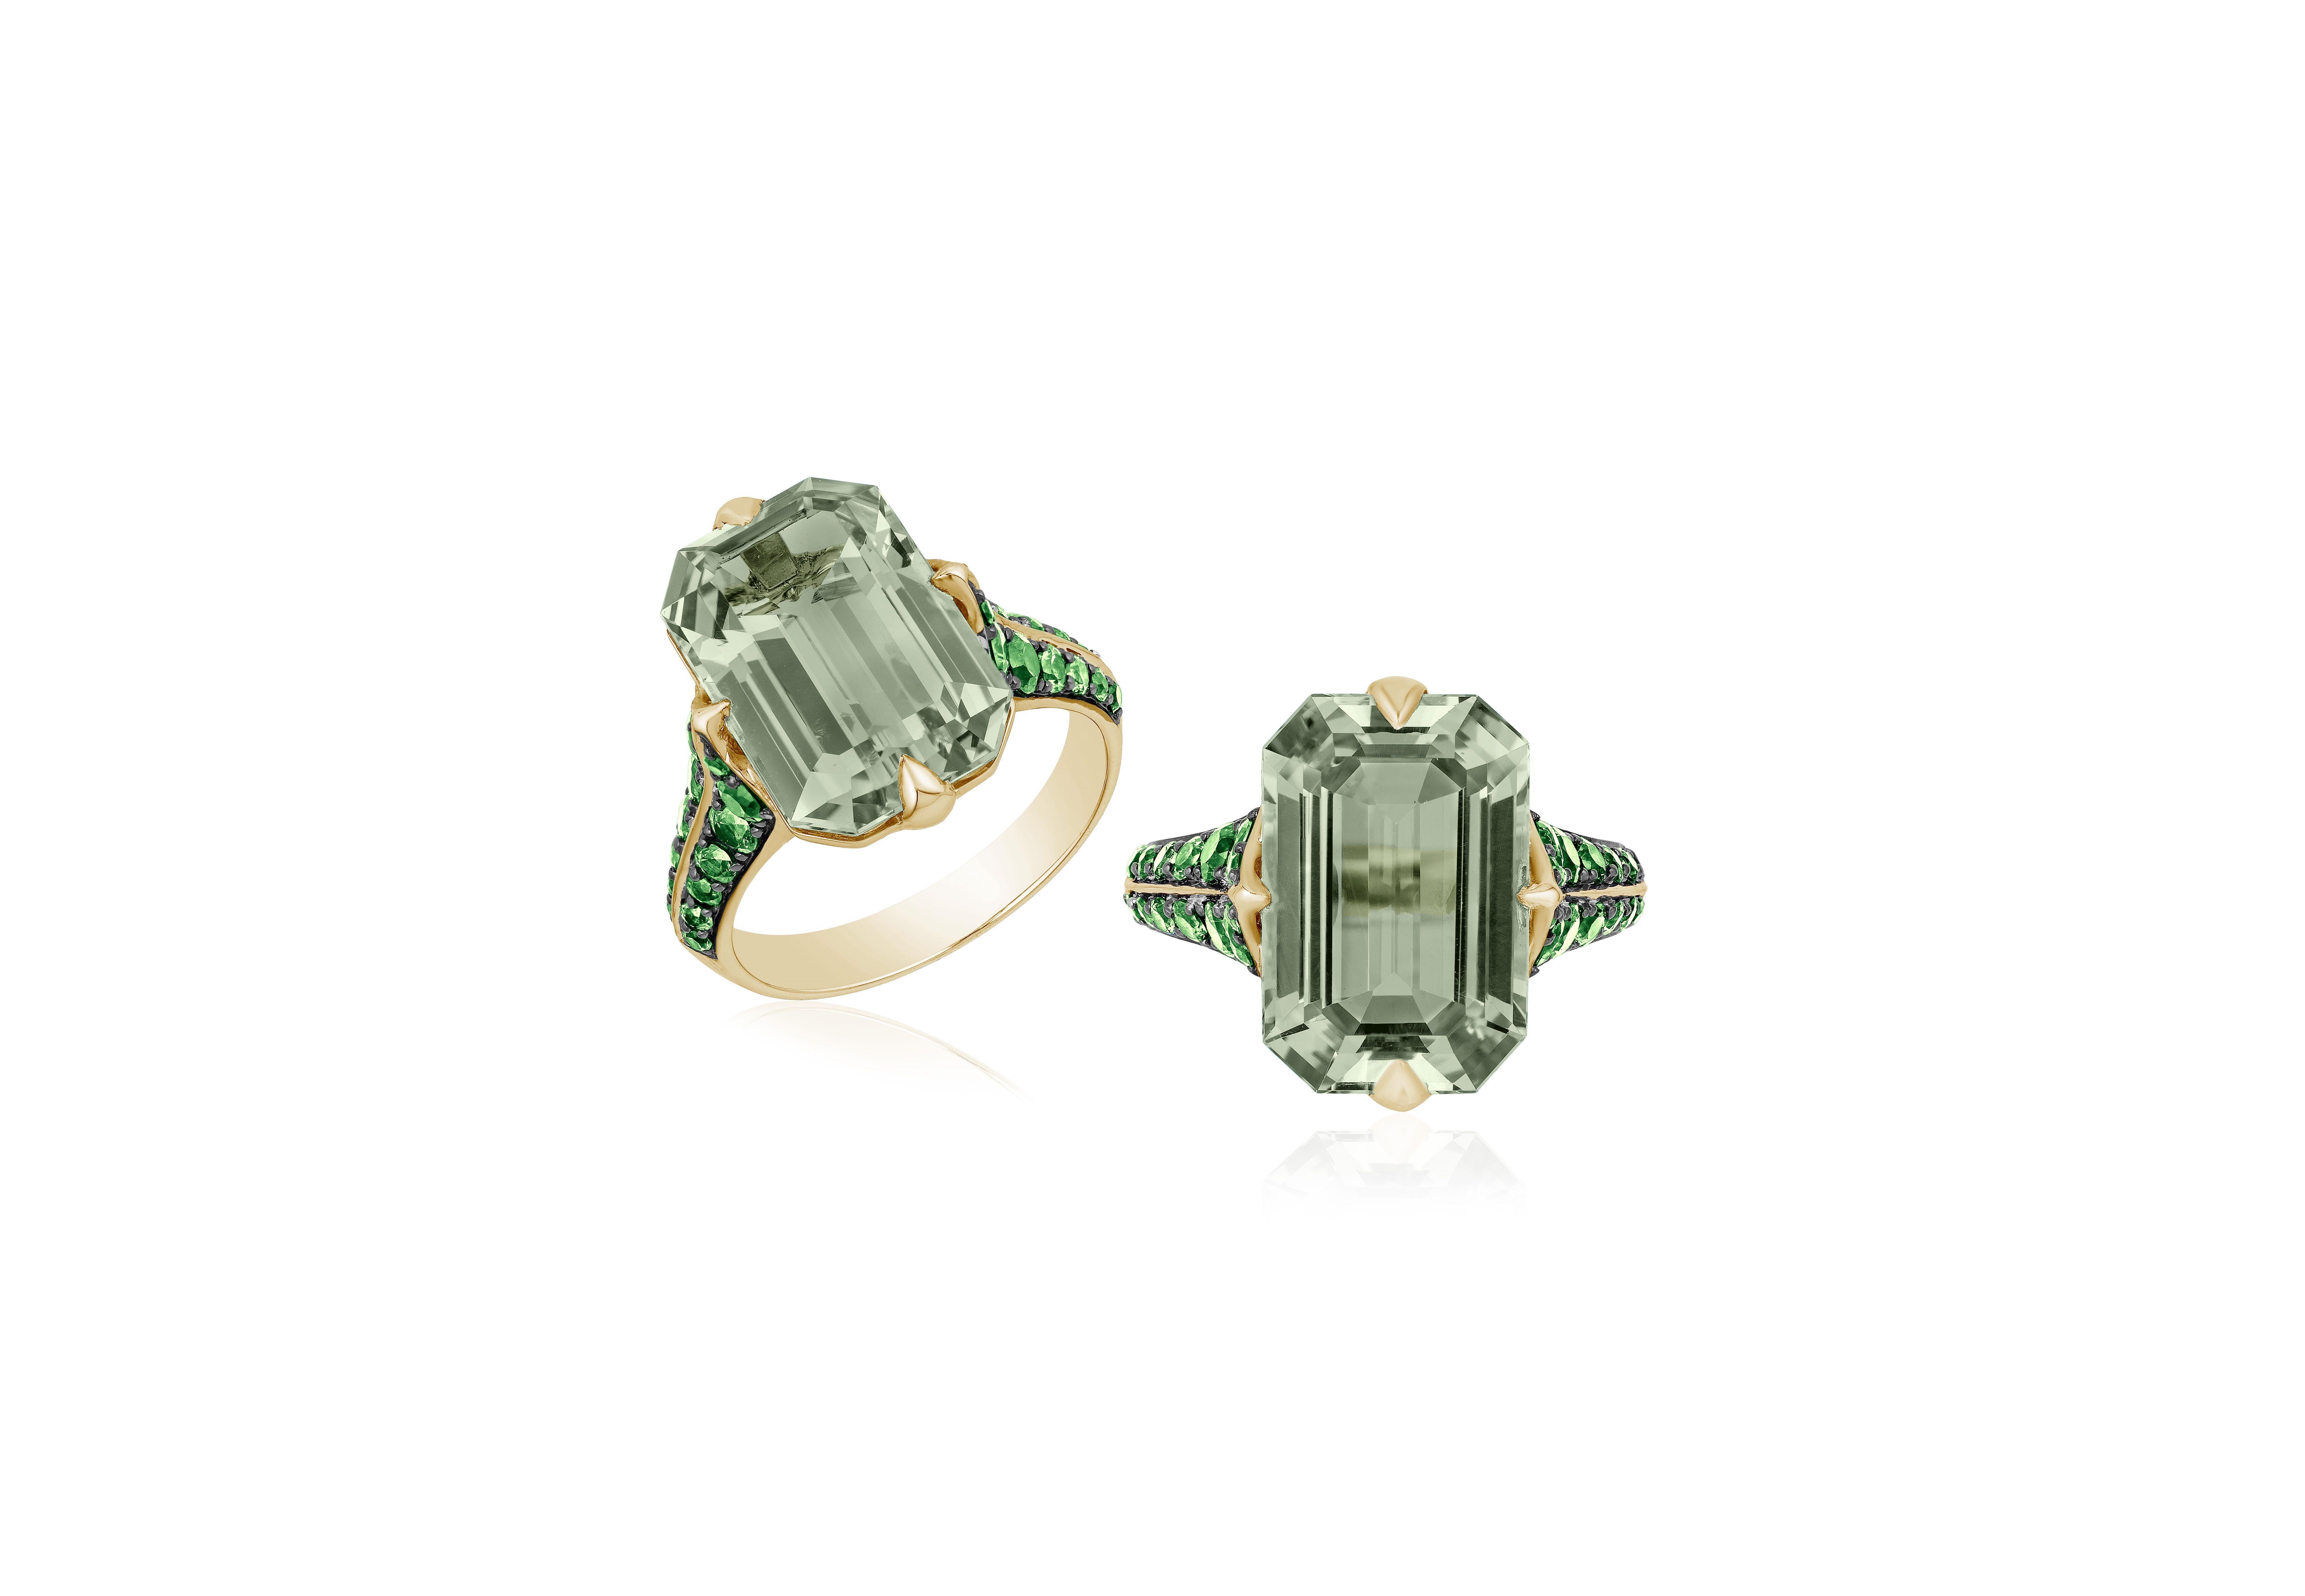 Prasiolite Emerald Cut Ring with Tsavorite in 18K Yellow Gold, from 'Rain-Forest' Collection

Stone Size: 15 x 10 mm

Gemstone Approx. Wt: Prasiolite- 6.44 Carats
                                          Tsavorite- 0.75 Carats